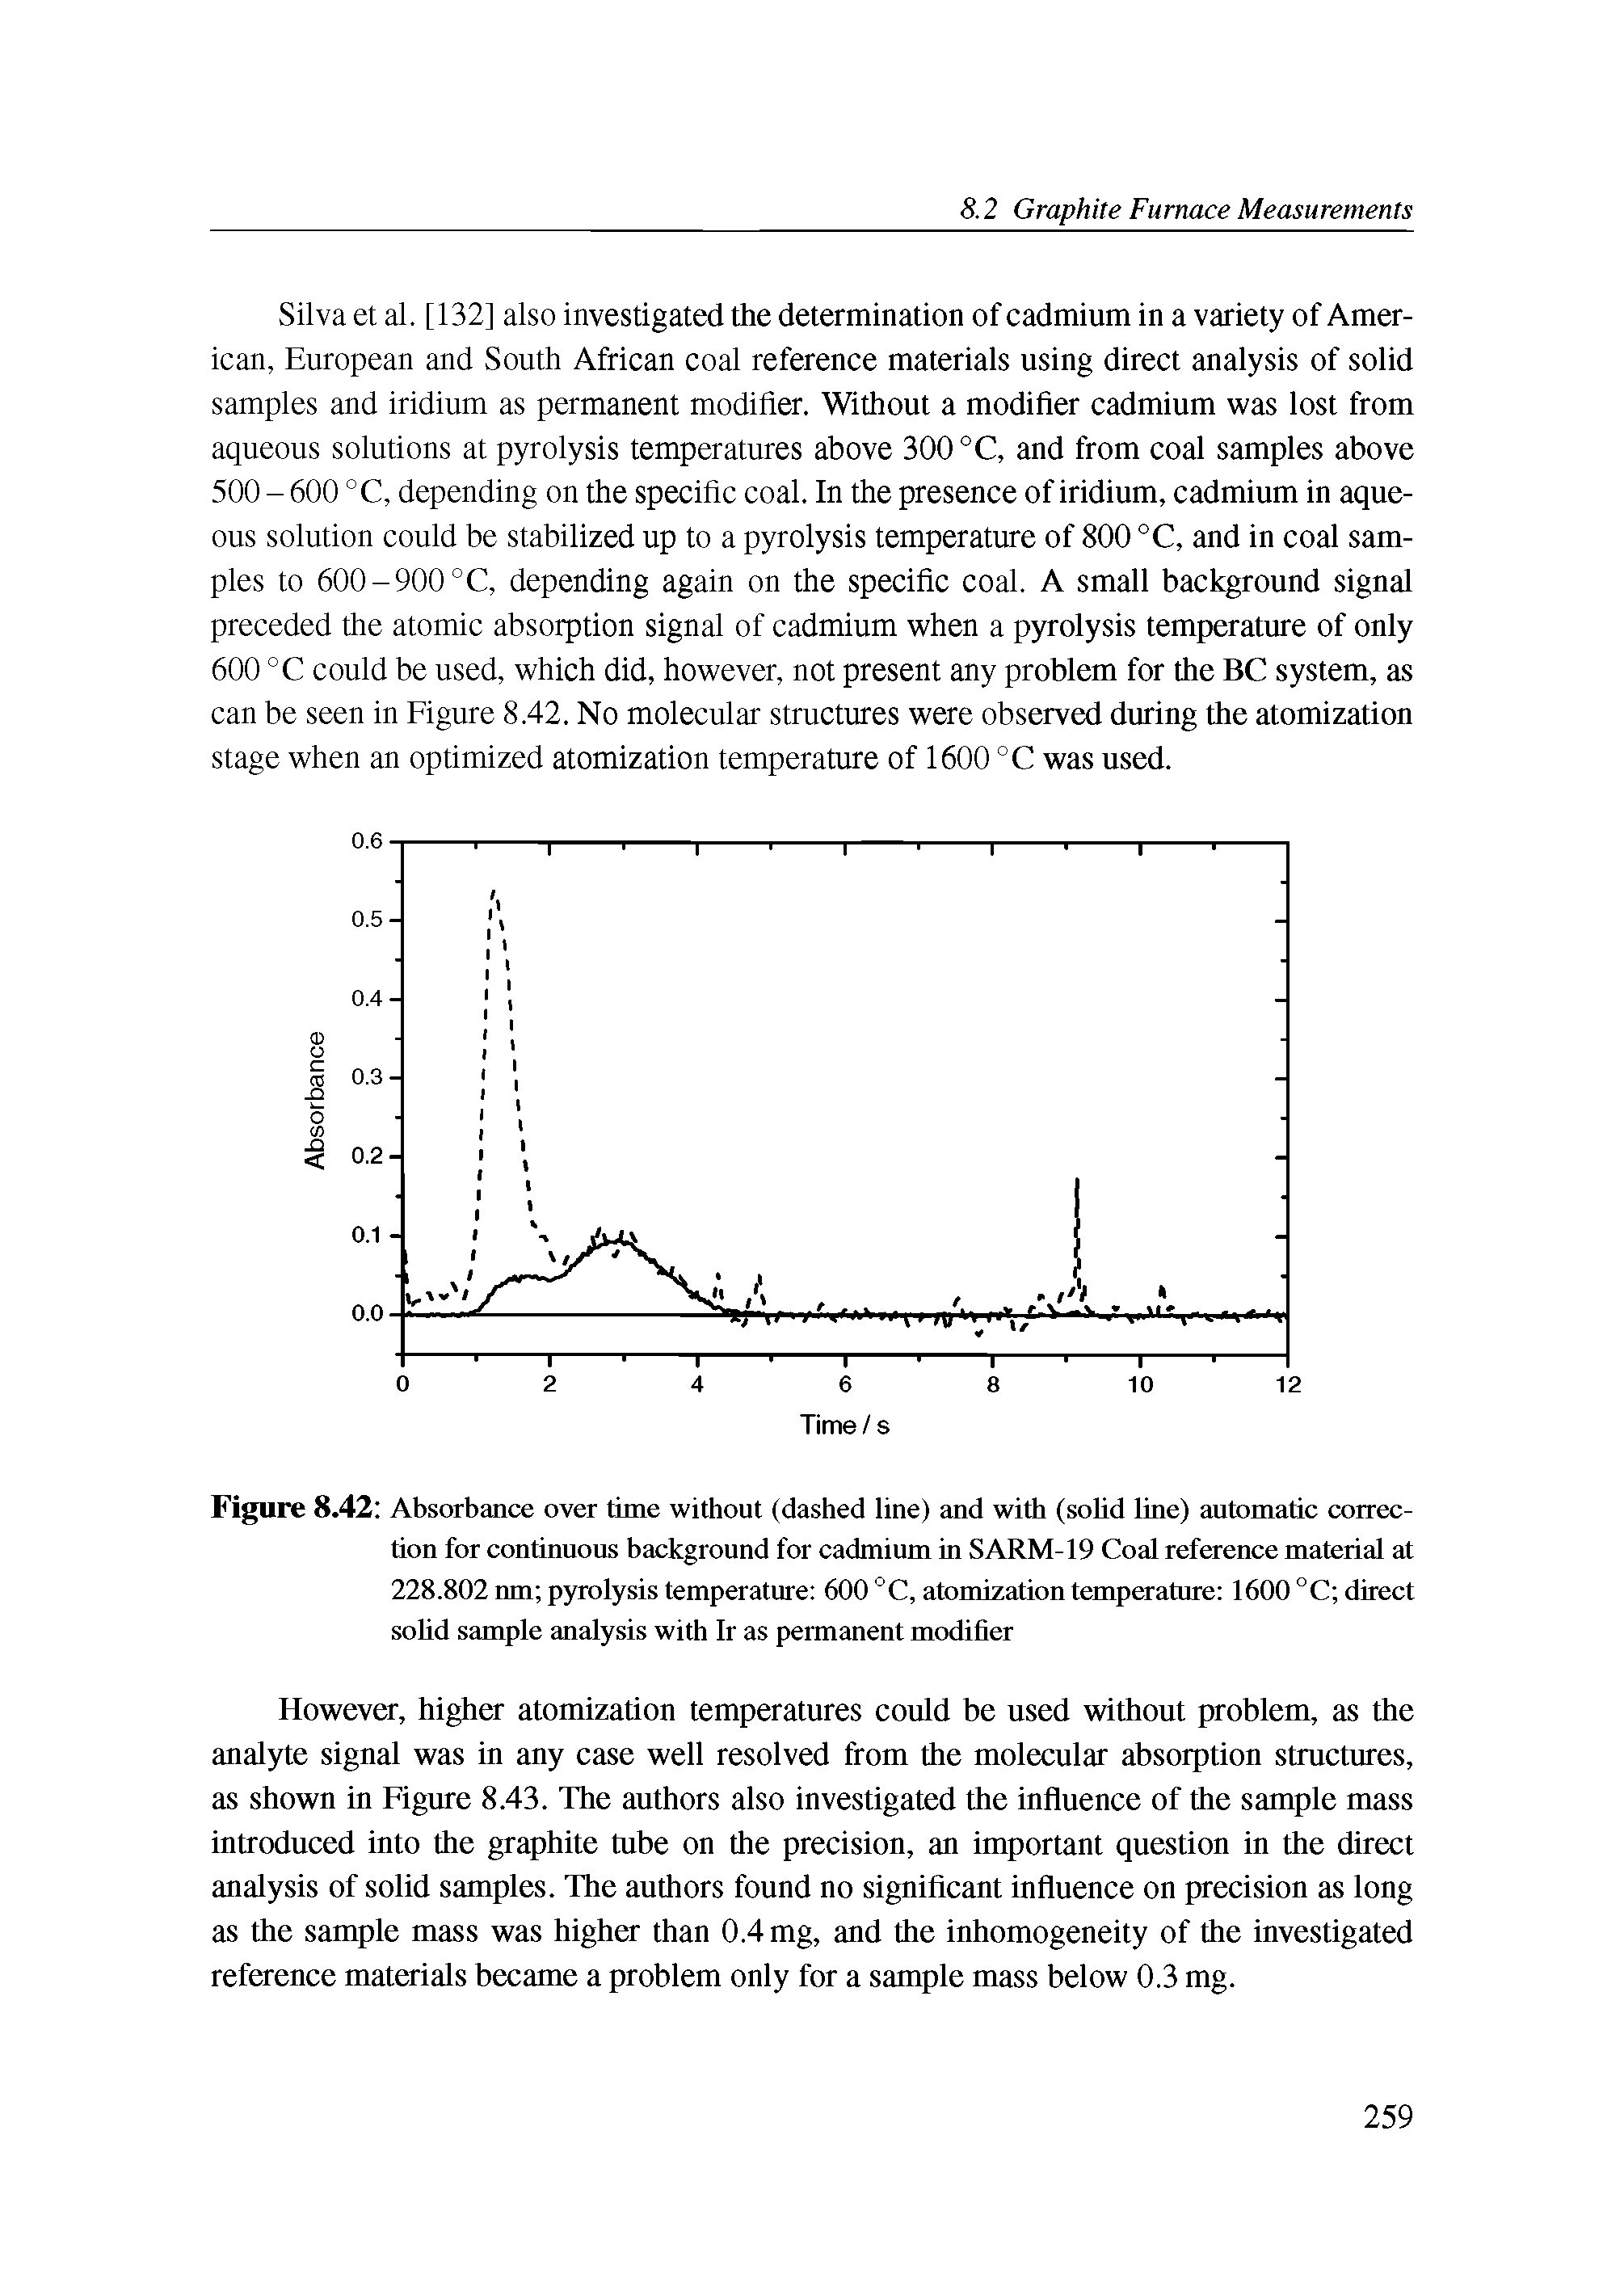 Figure 8.42 Absorbance over time without (dashed line) and with (solid line) automatic correction for continuous background for cadmium in SARM-19 Coal reference material at 228.802 nm pyrolysis temperature 600 °C, atomization temperature 1600 °C direct solid sample analysis with Ir as permanent modifier...